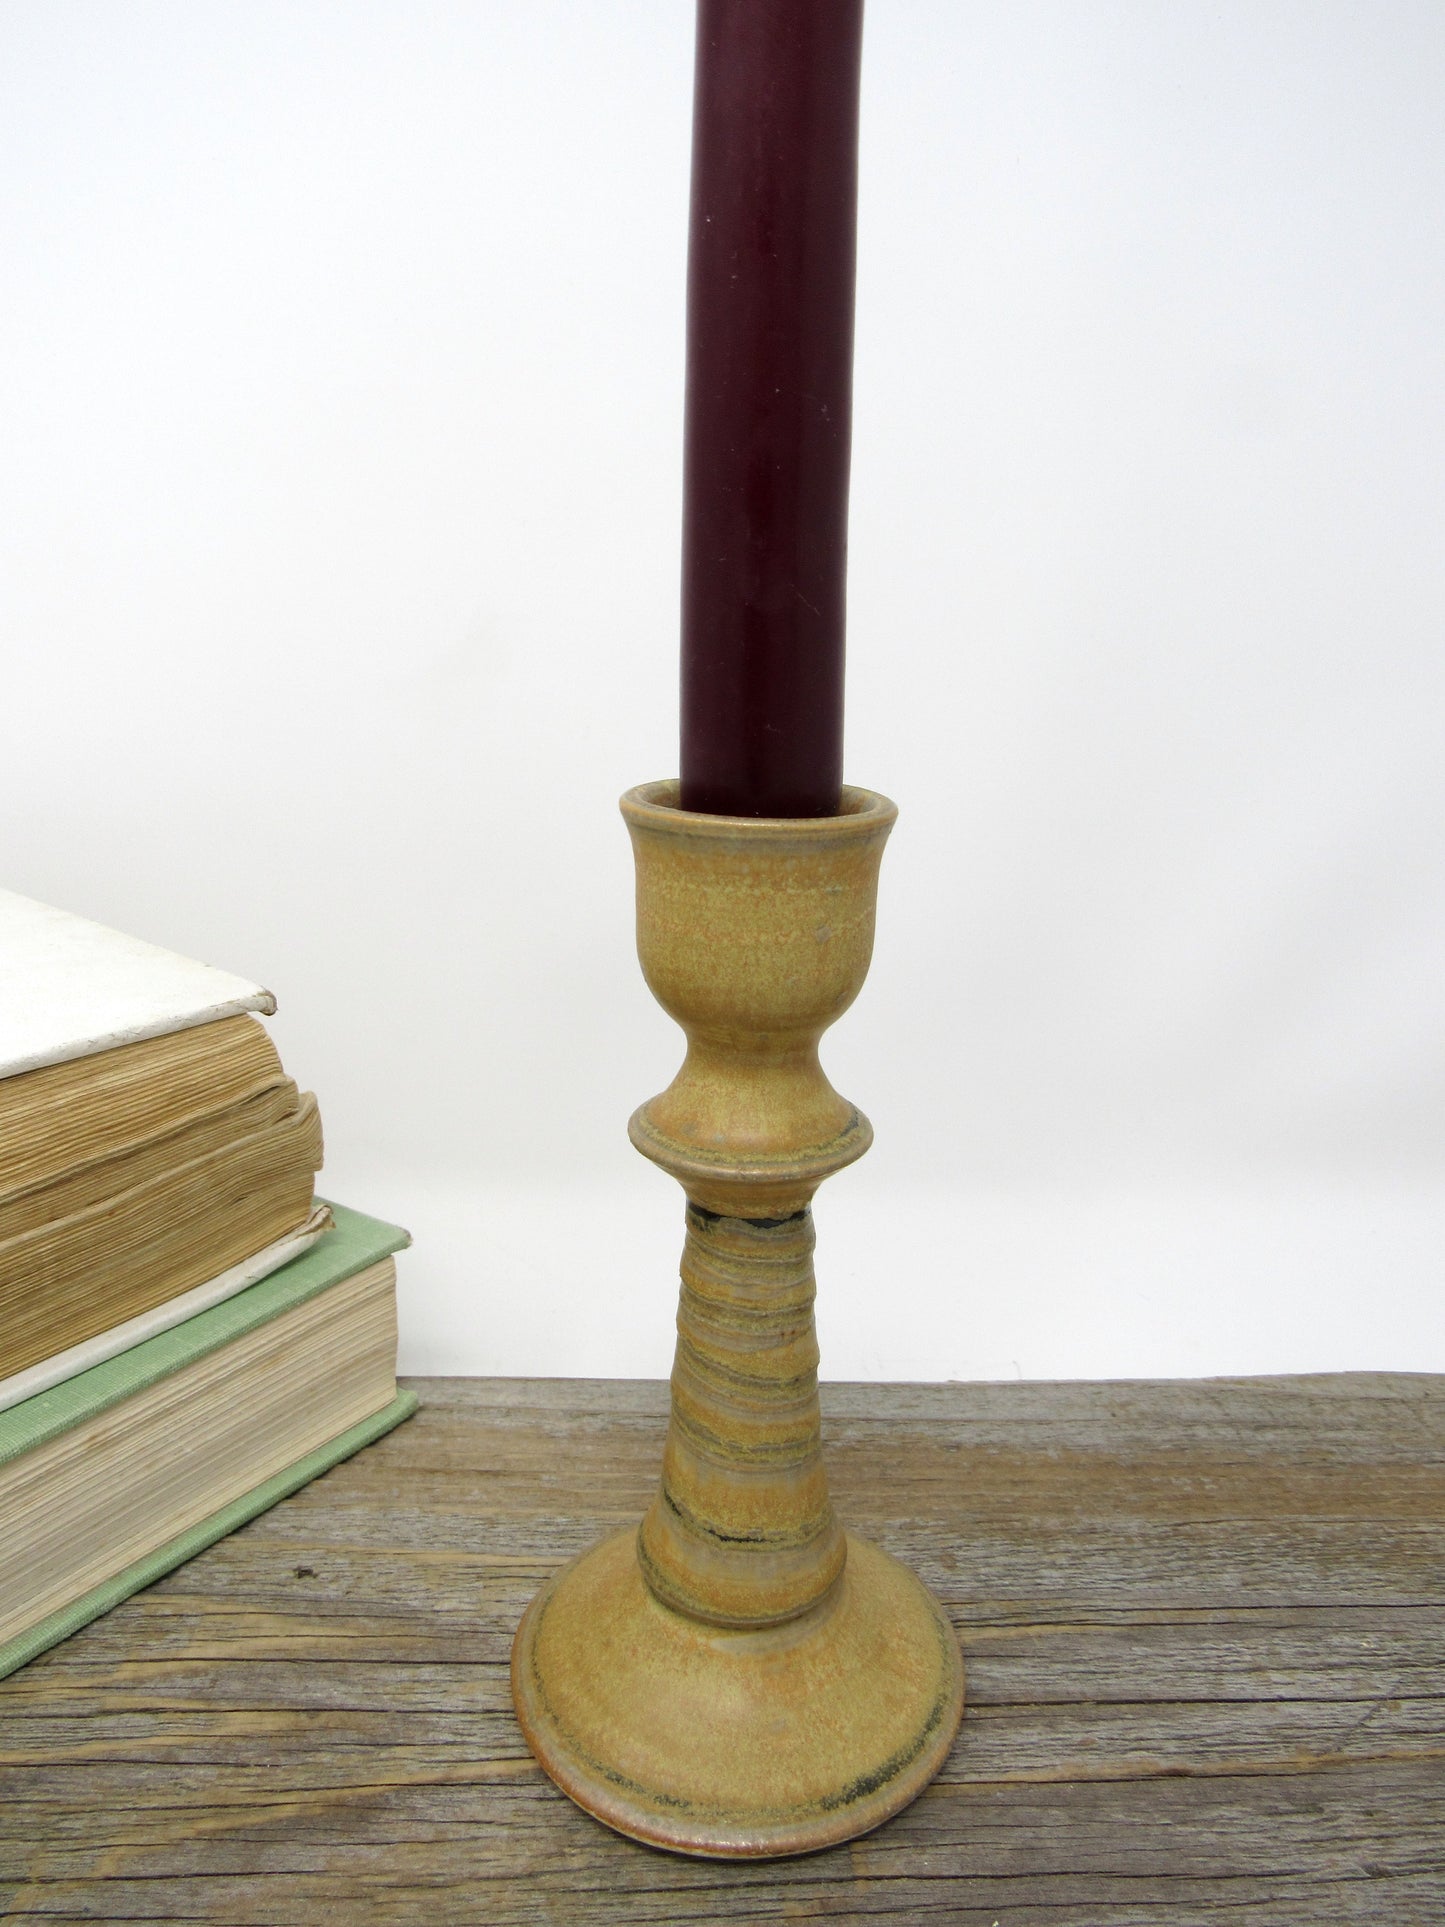 Candlestick in Goldenrod #2